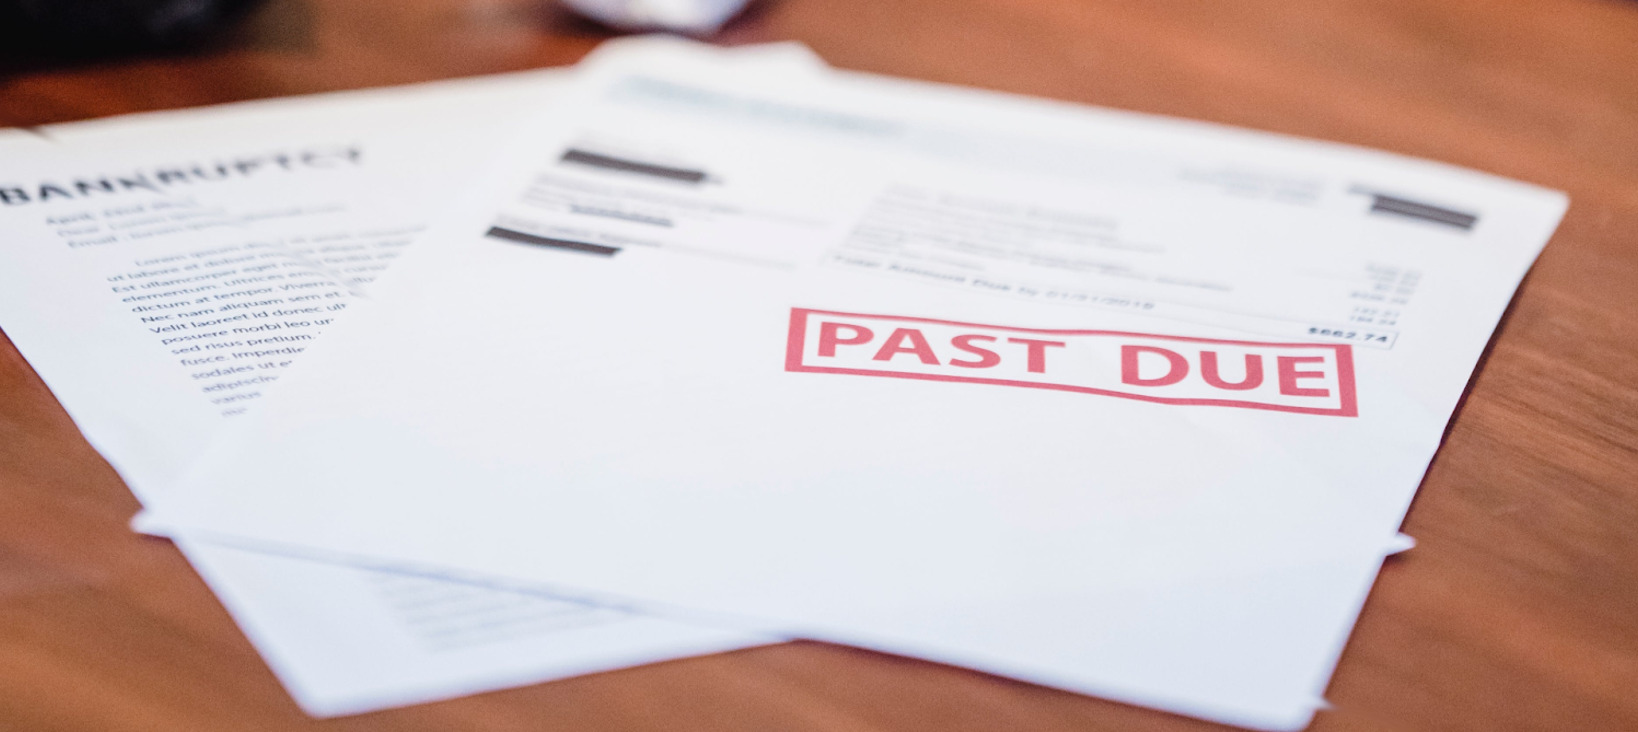 Photo of two sheets of paper on a table. The content of the paper is blurry but one has a readable heading bankruptcy and the other has a large red stamp "Past due".